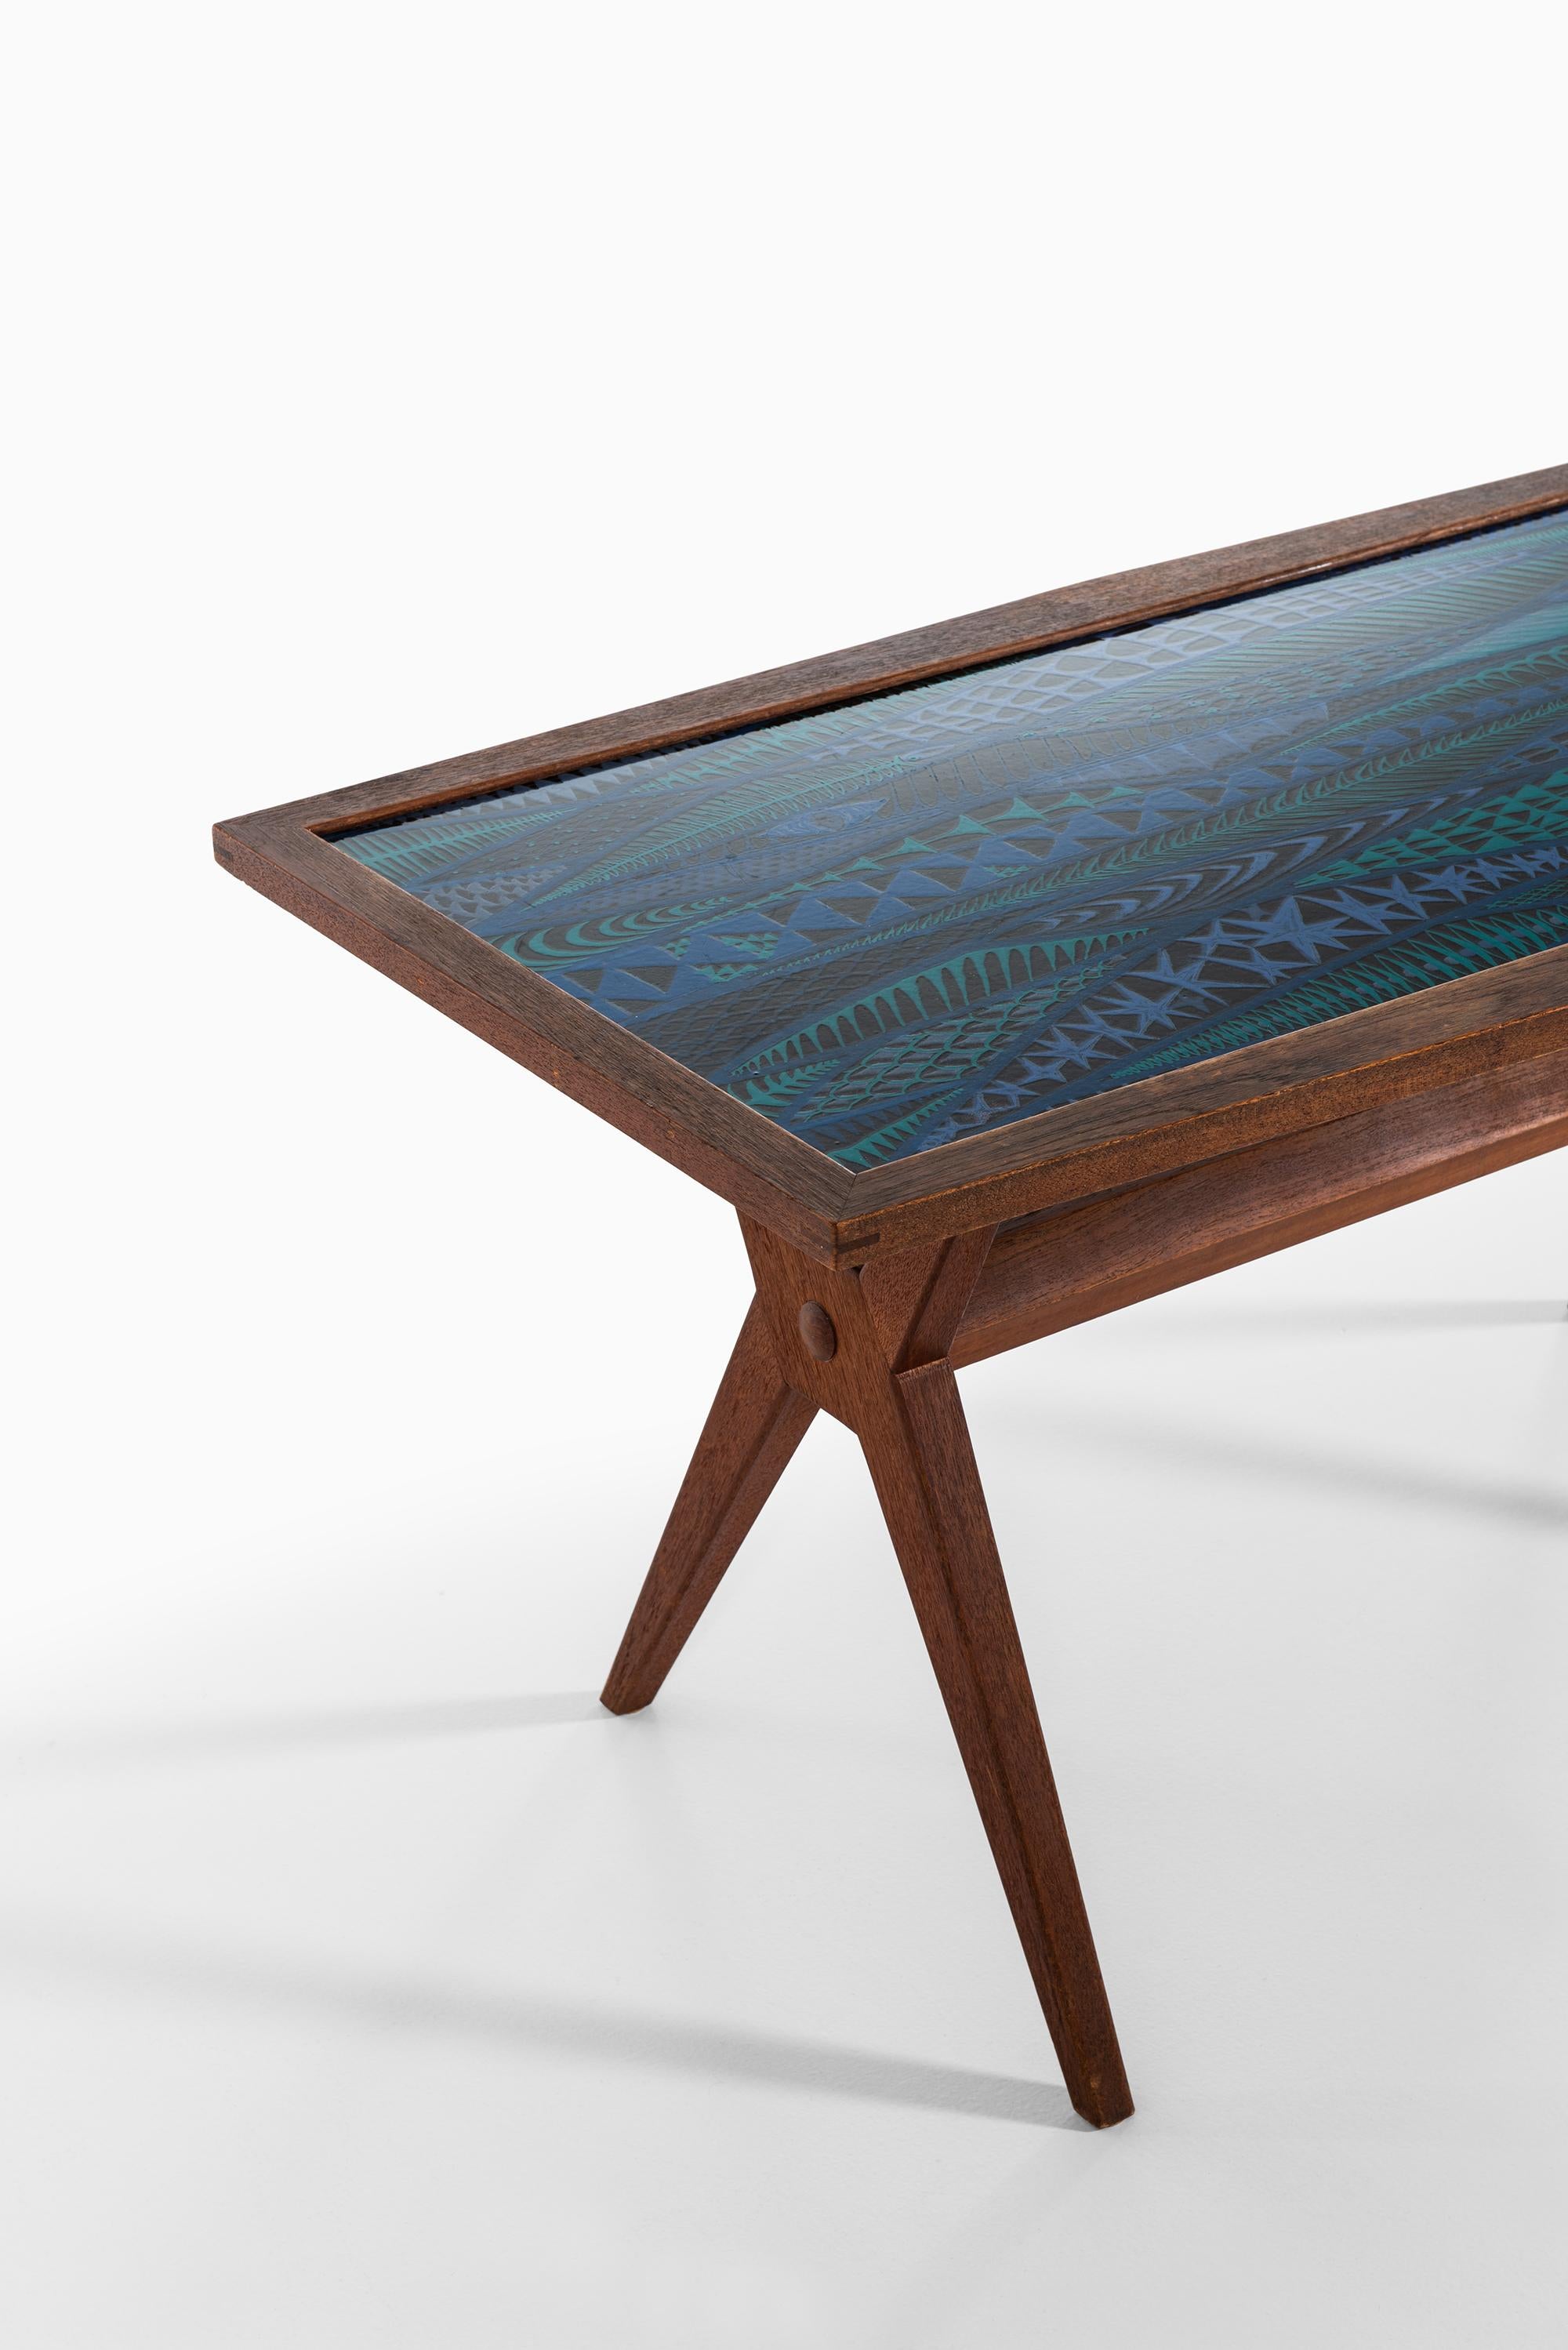 Mid-20th Century Stig Lindberg Coffee Table Produced by Gustavsberg in Sweden For Sale